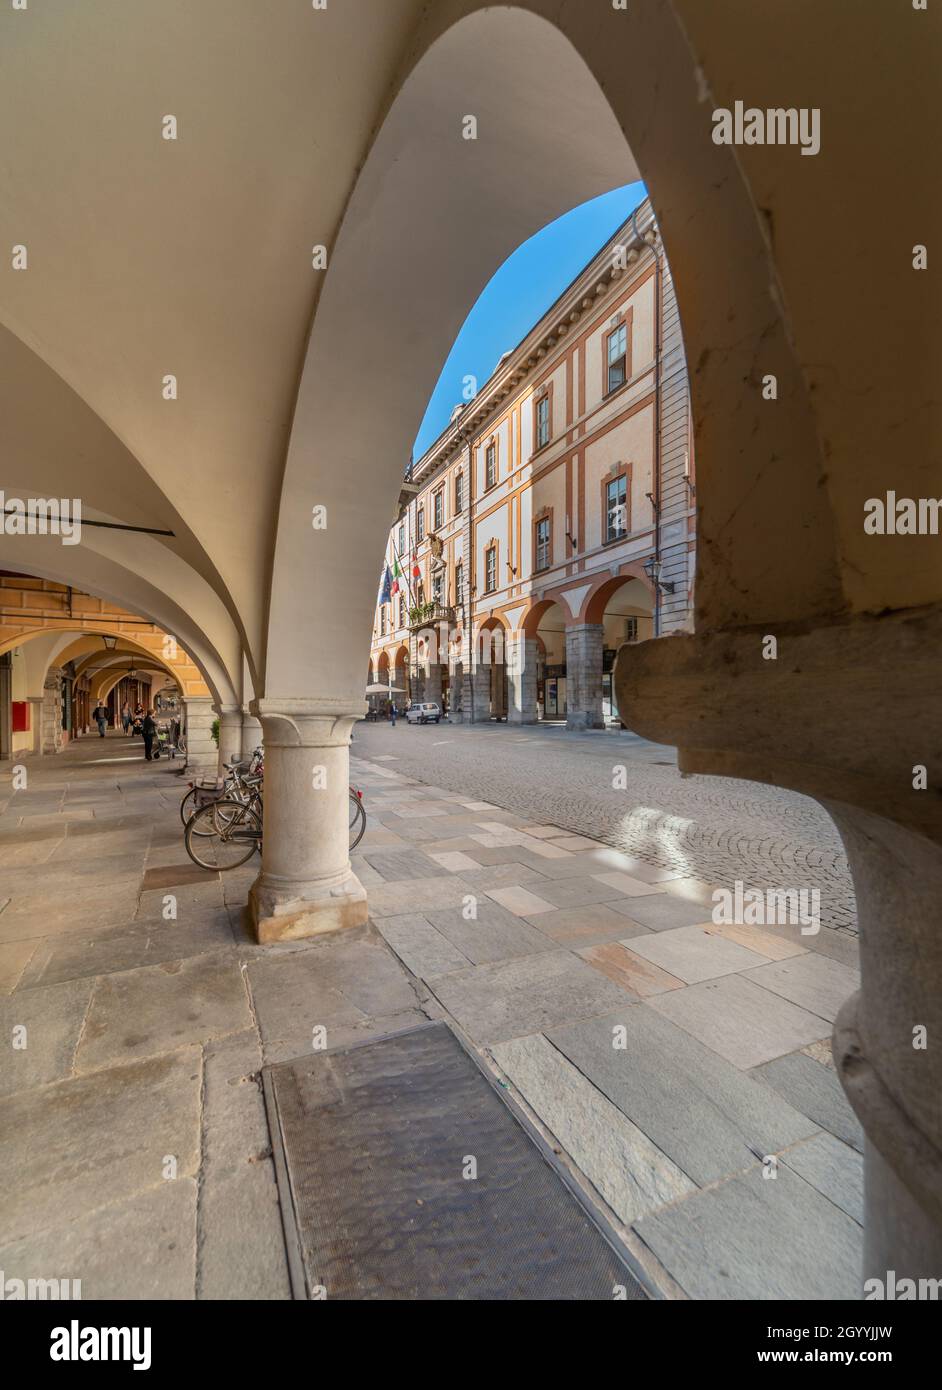 Cuneo, Piedmont, Italy - October 6, 2021: the town hall seen from the arches of the historic arcades (Portici di Cuneo) in Via Roma Stock Photo